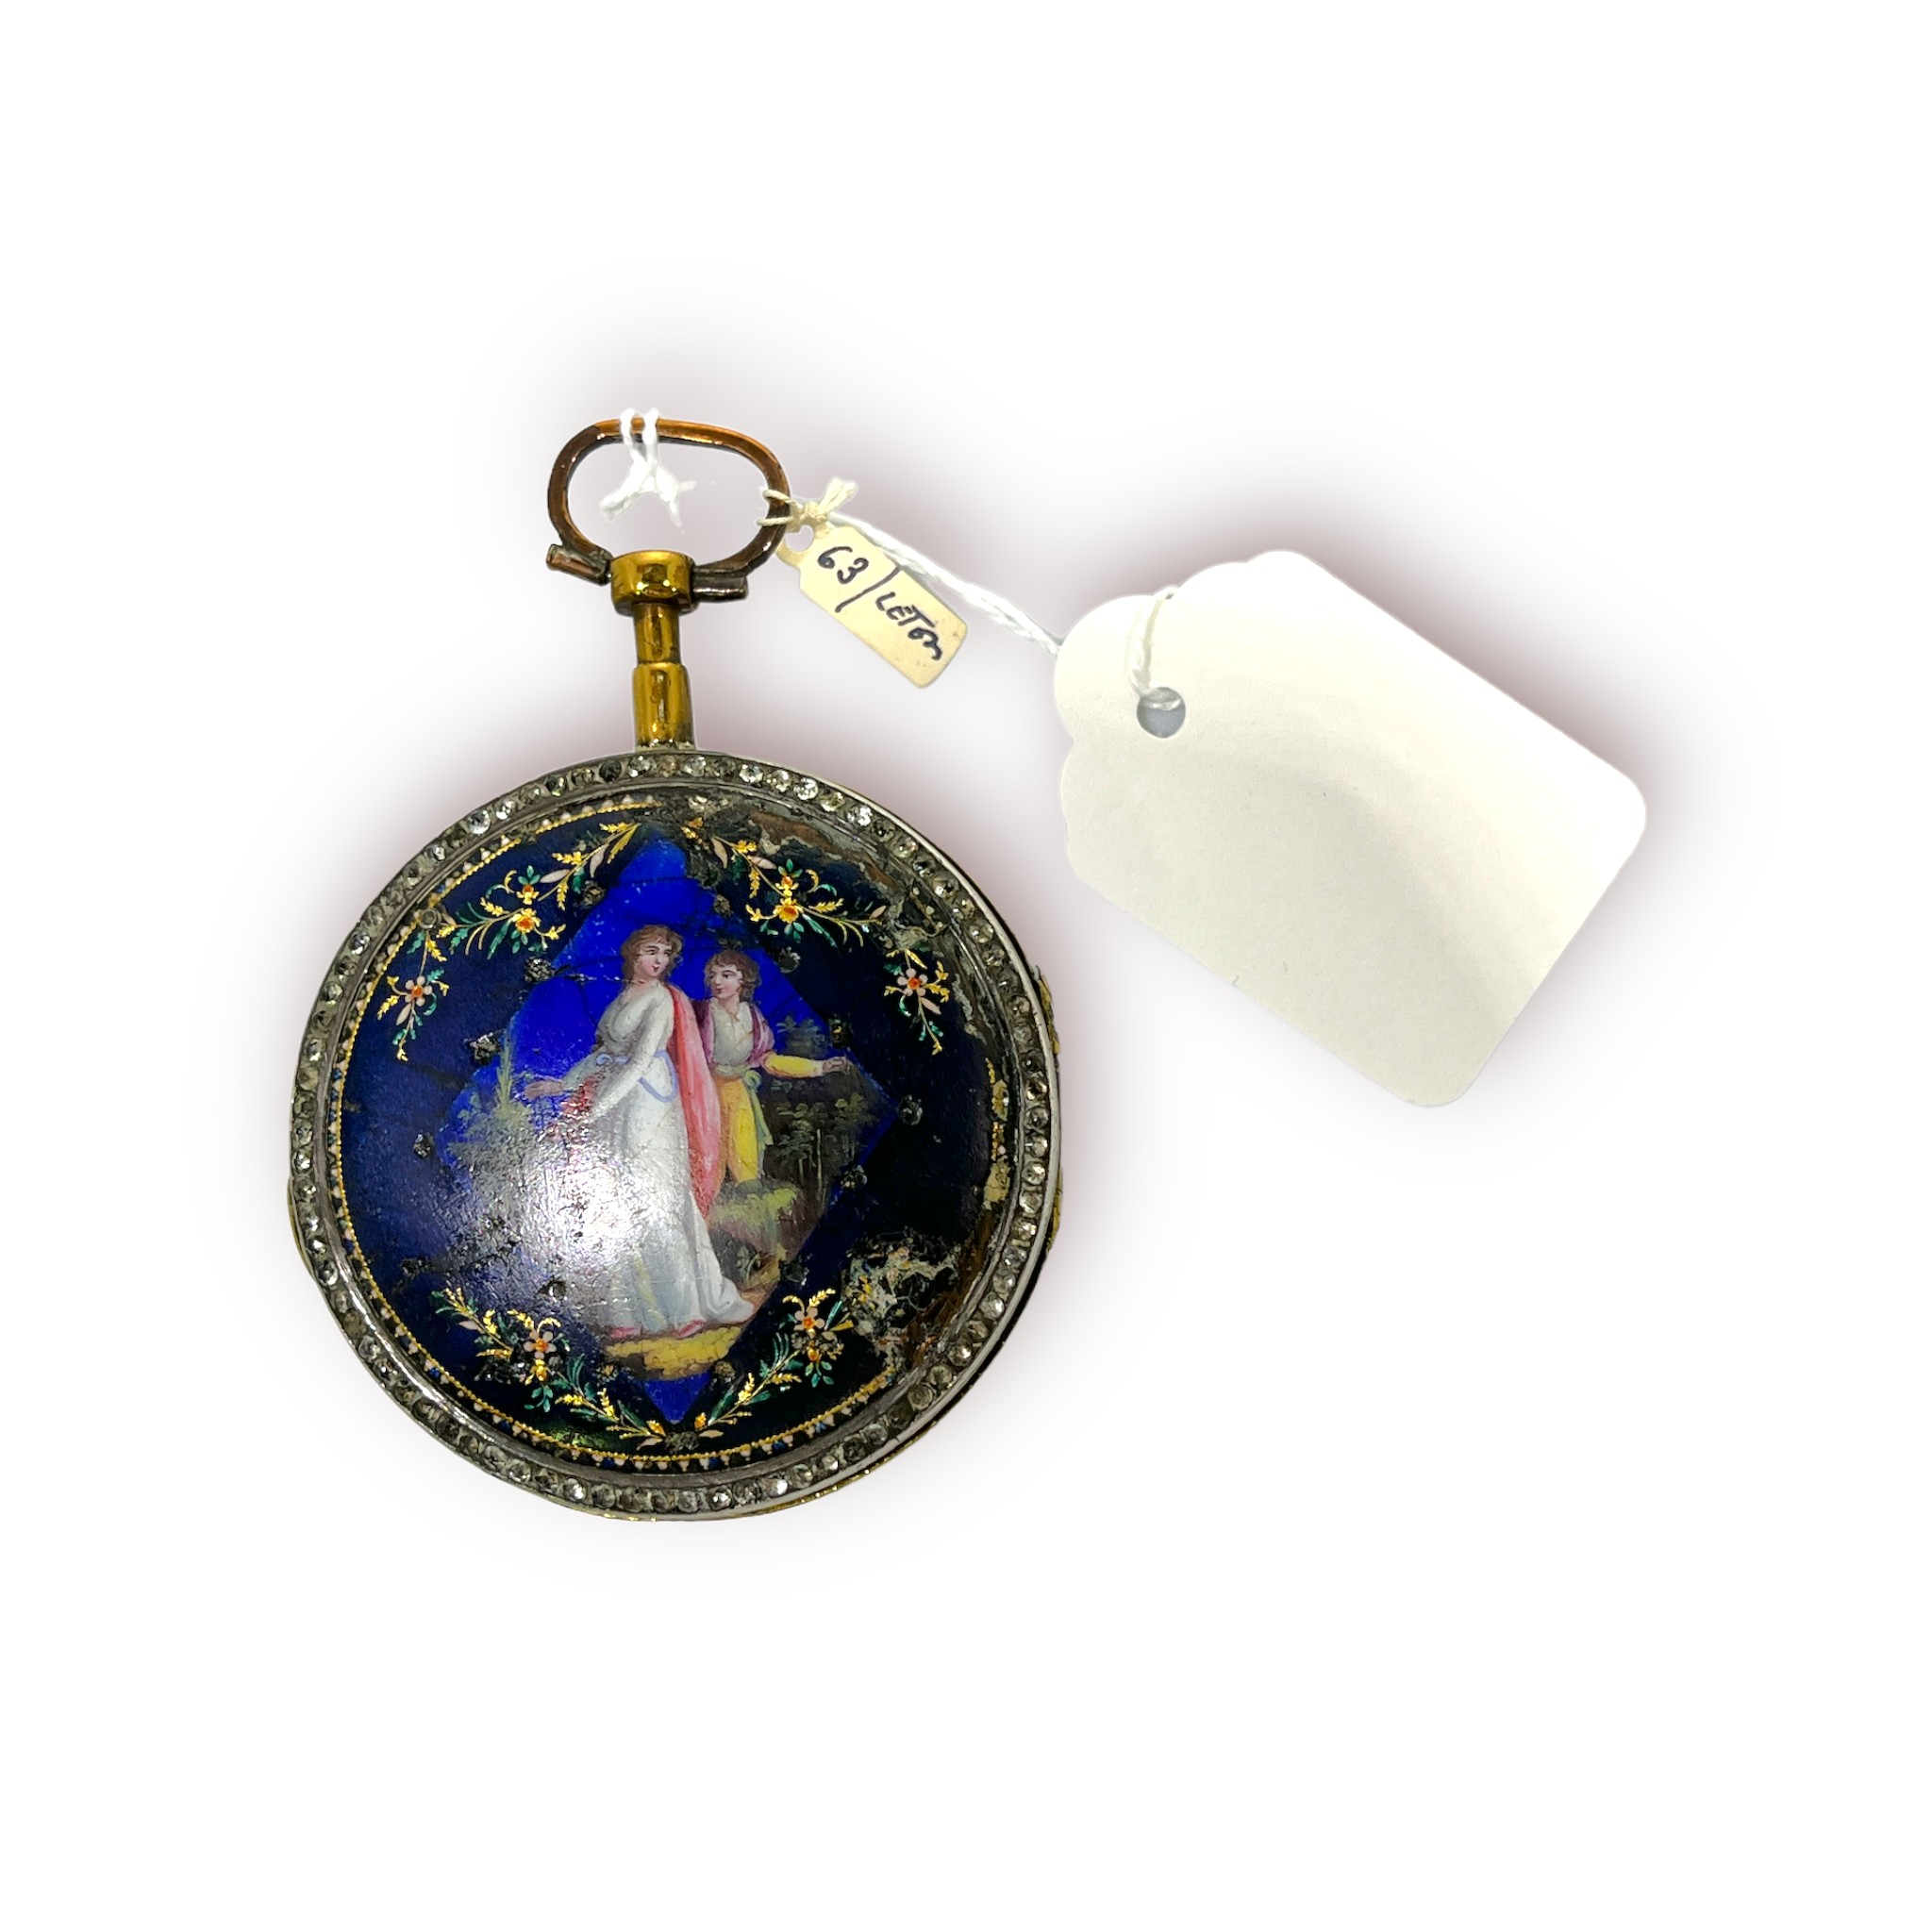 A 19th century Swiss open-face key wind gilt pocket watch by Fres. Veigneur, a Geneve, - Image 2 of 2